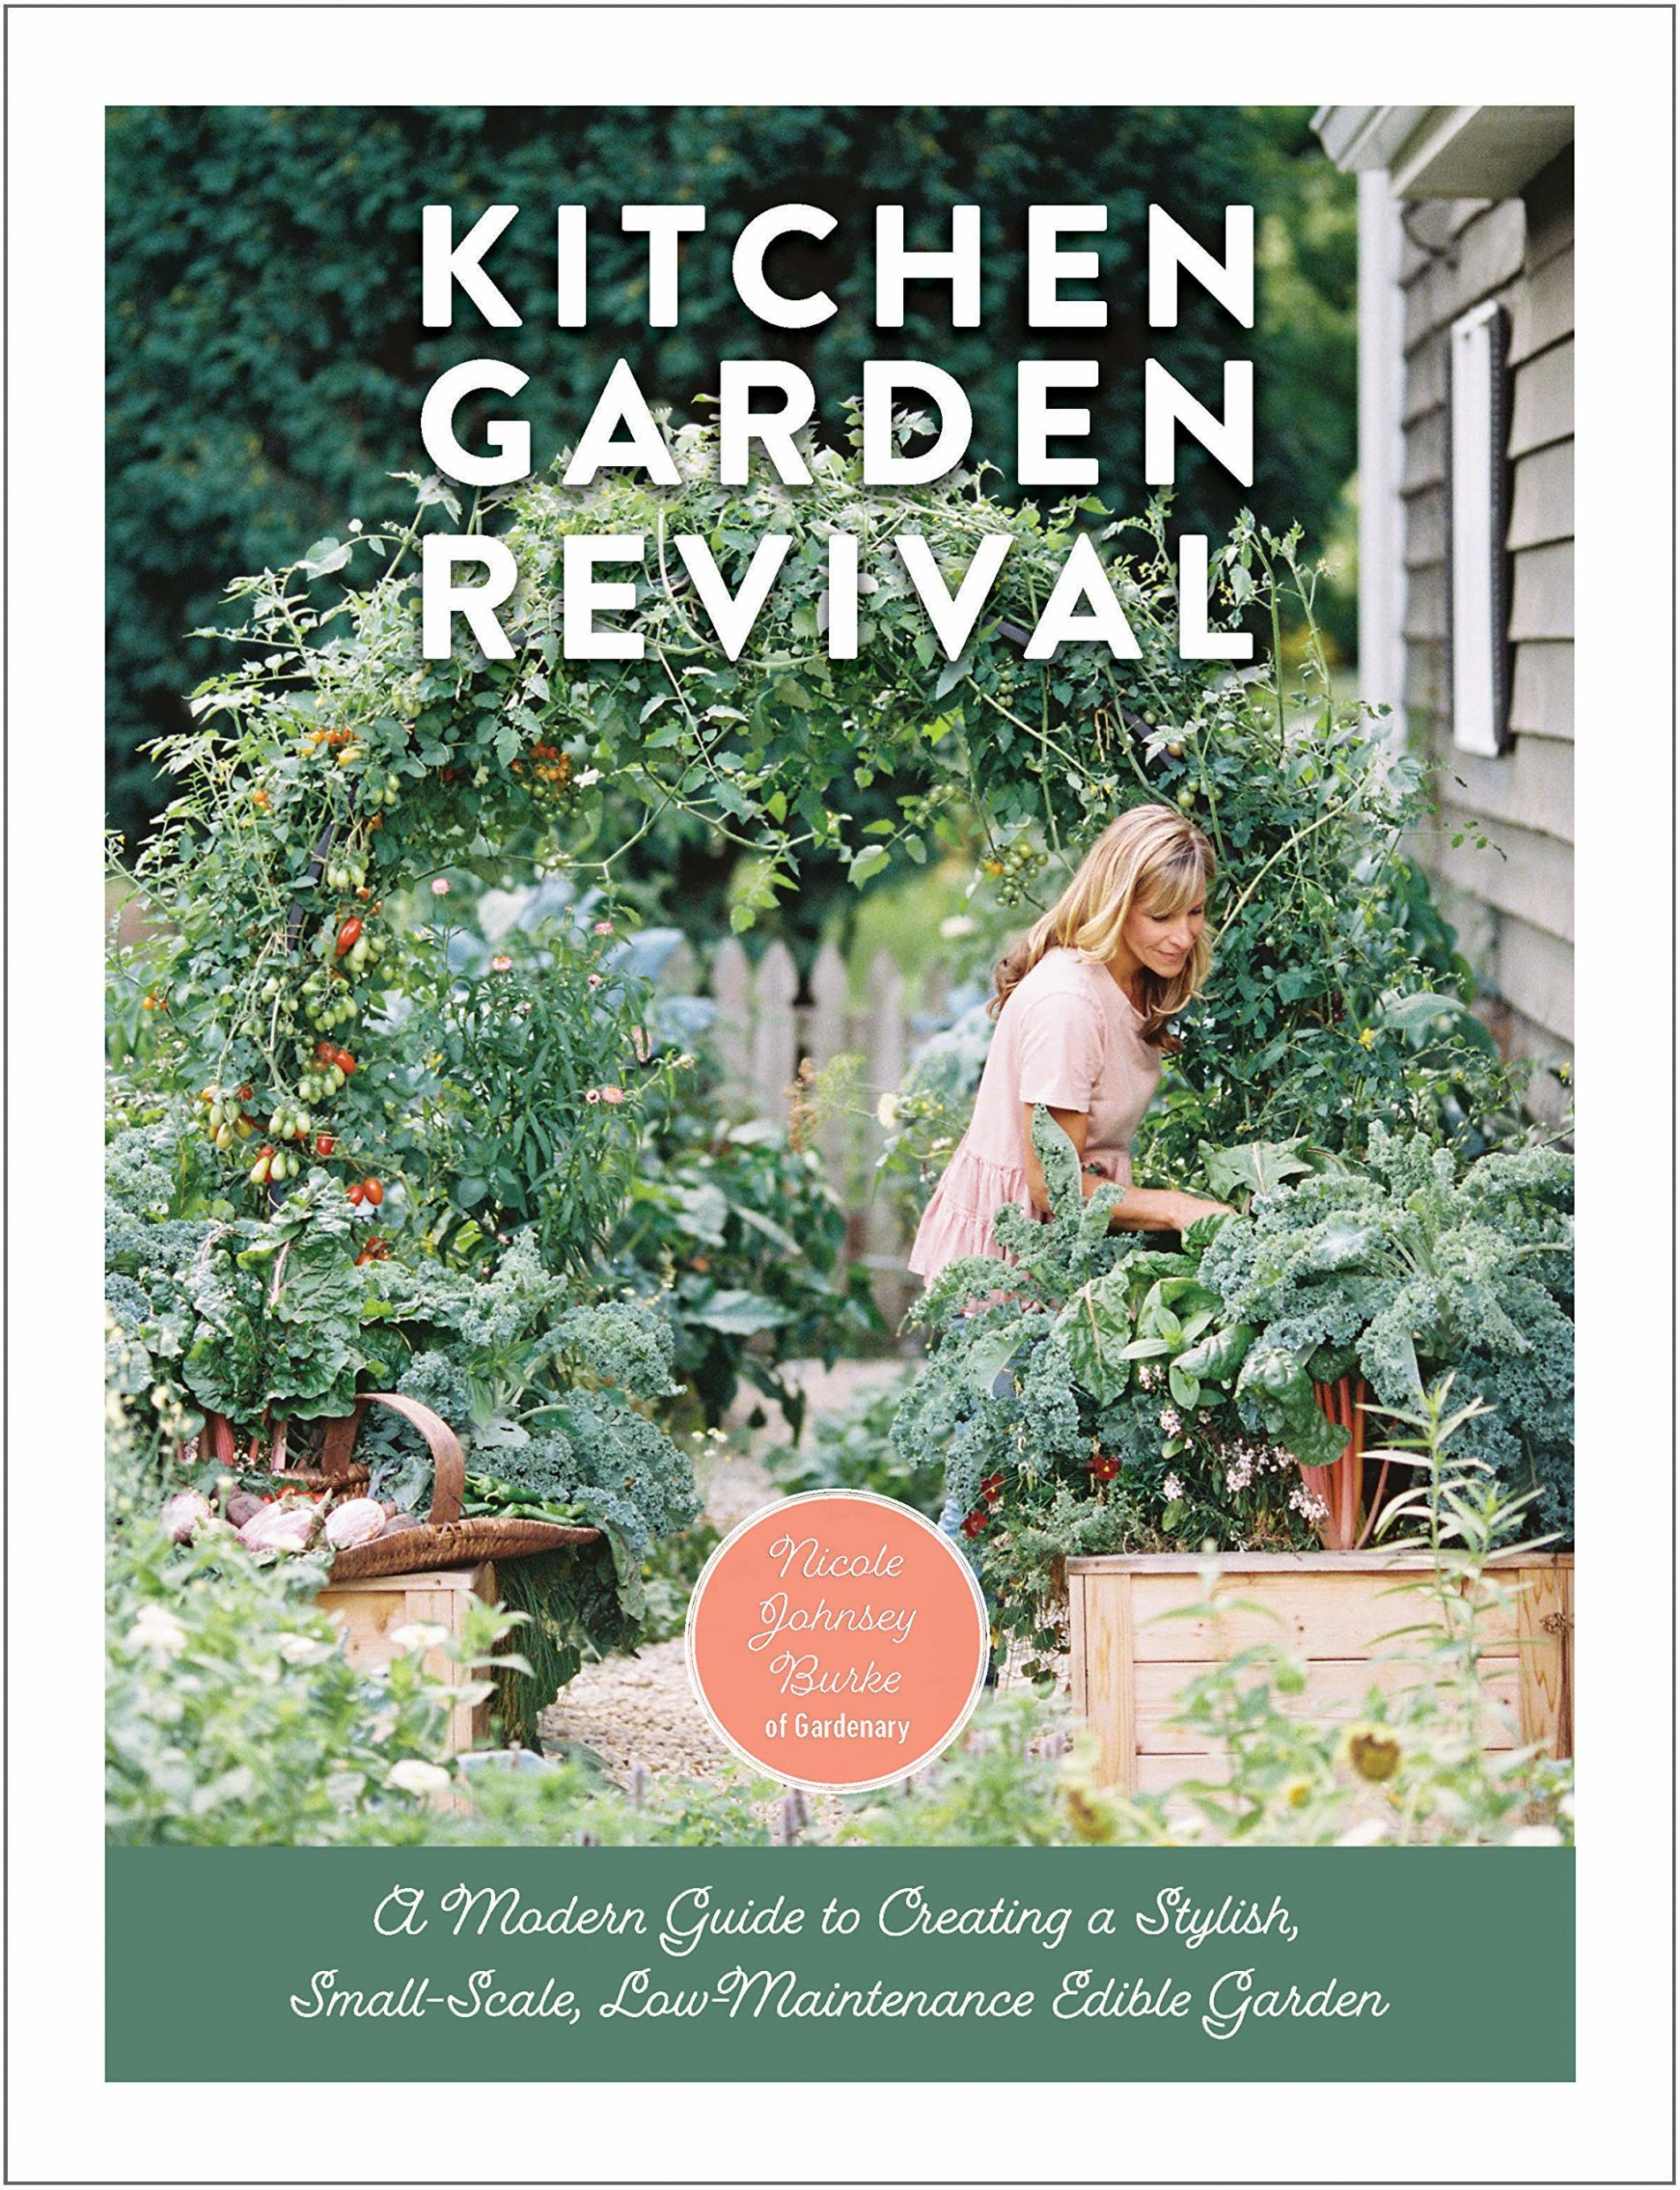 New Releases Vegetable and Flower Gardening Books   Diana Elizabeth